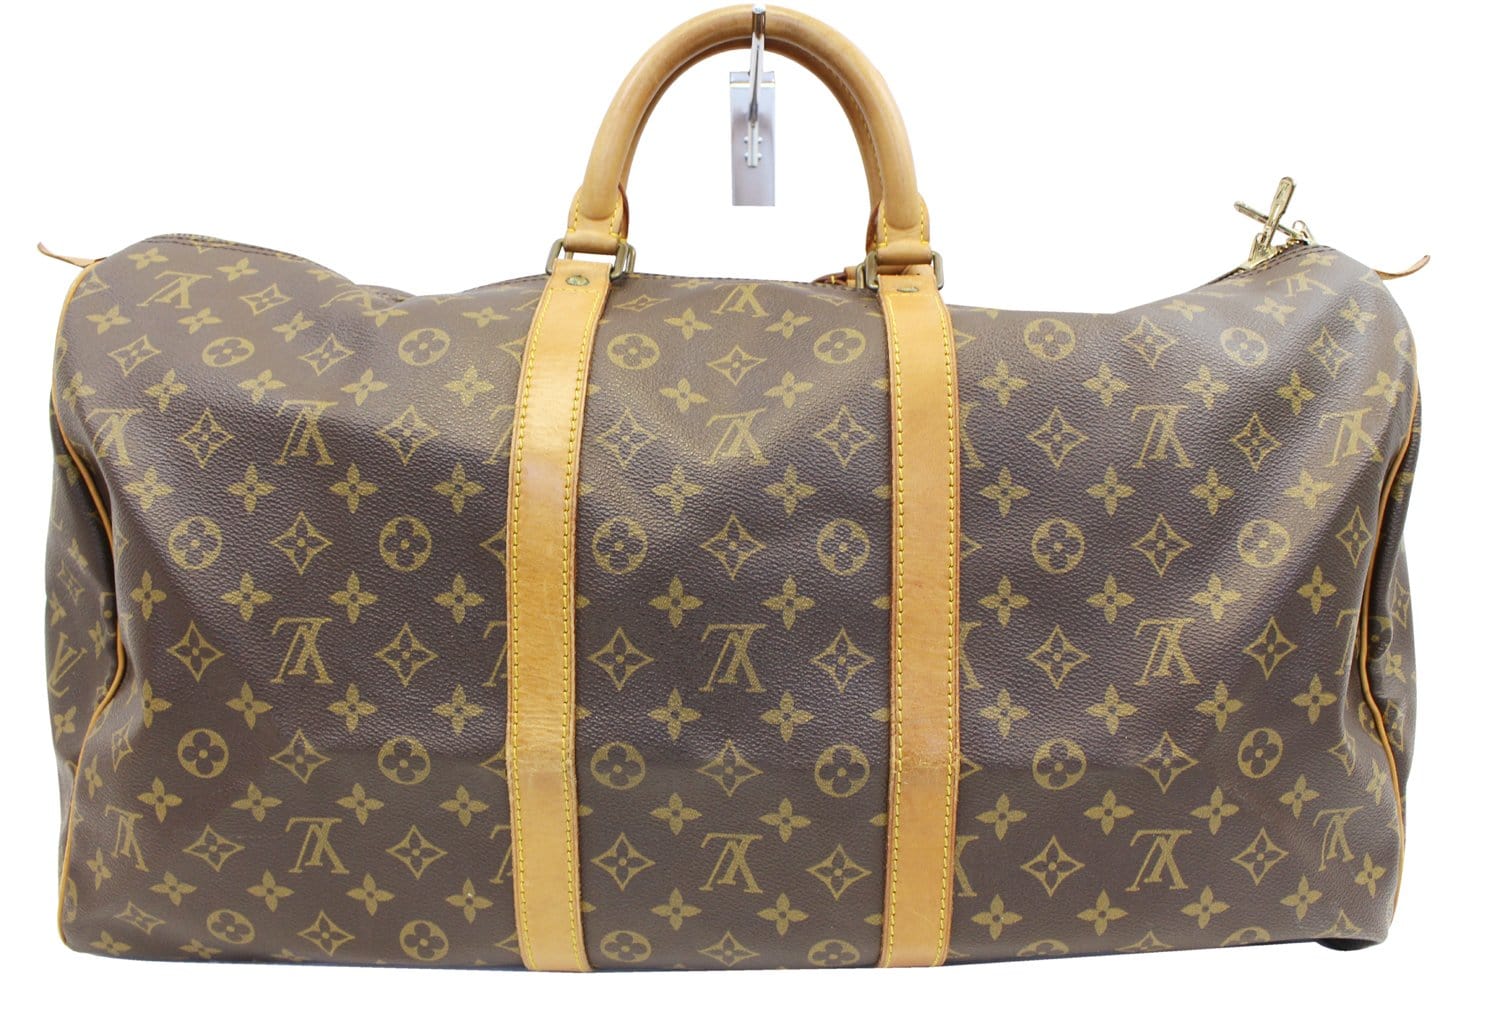 Louis Vuitton Louis Vuitton Keepall Large Bags & Handbags for Women, Authenticity Guaranteed